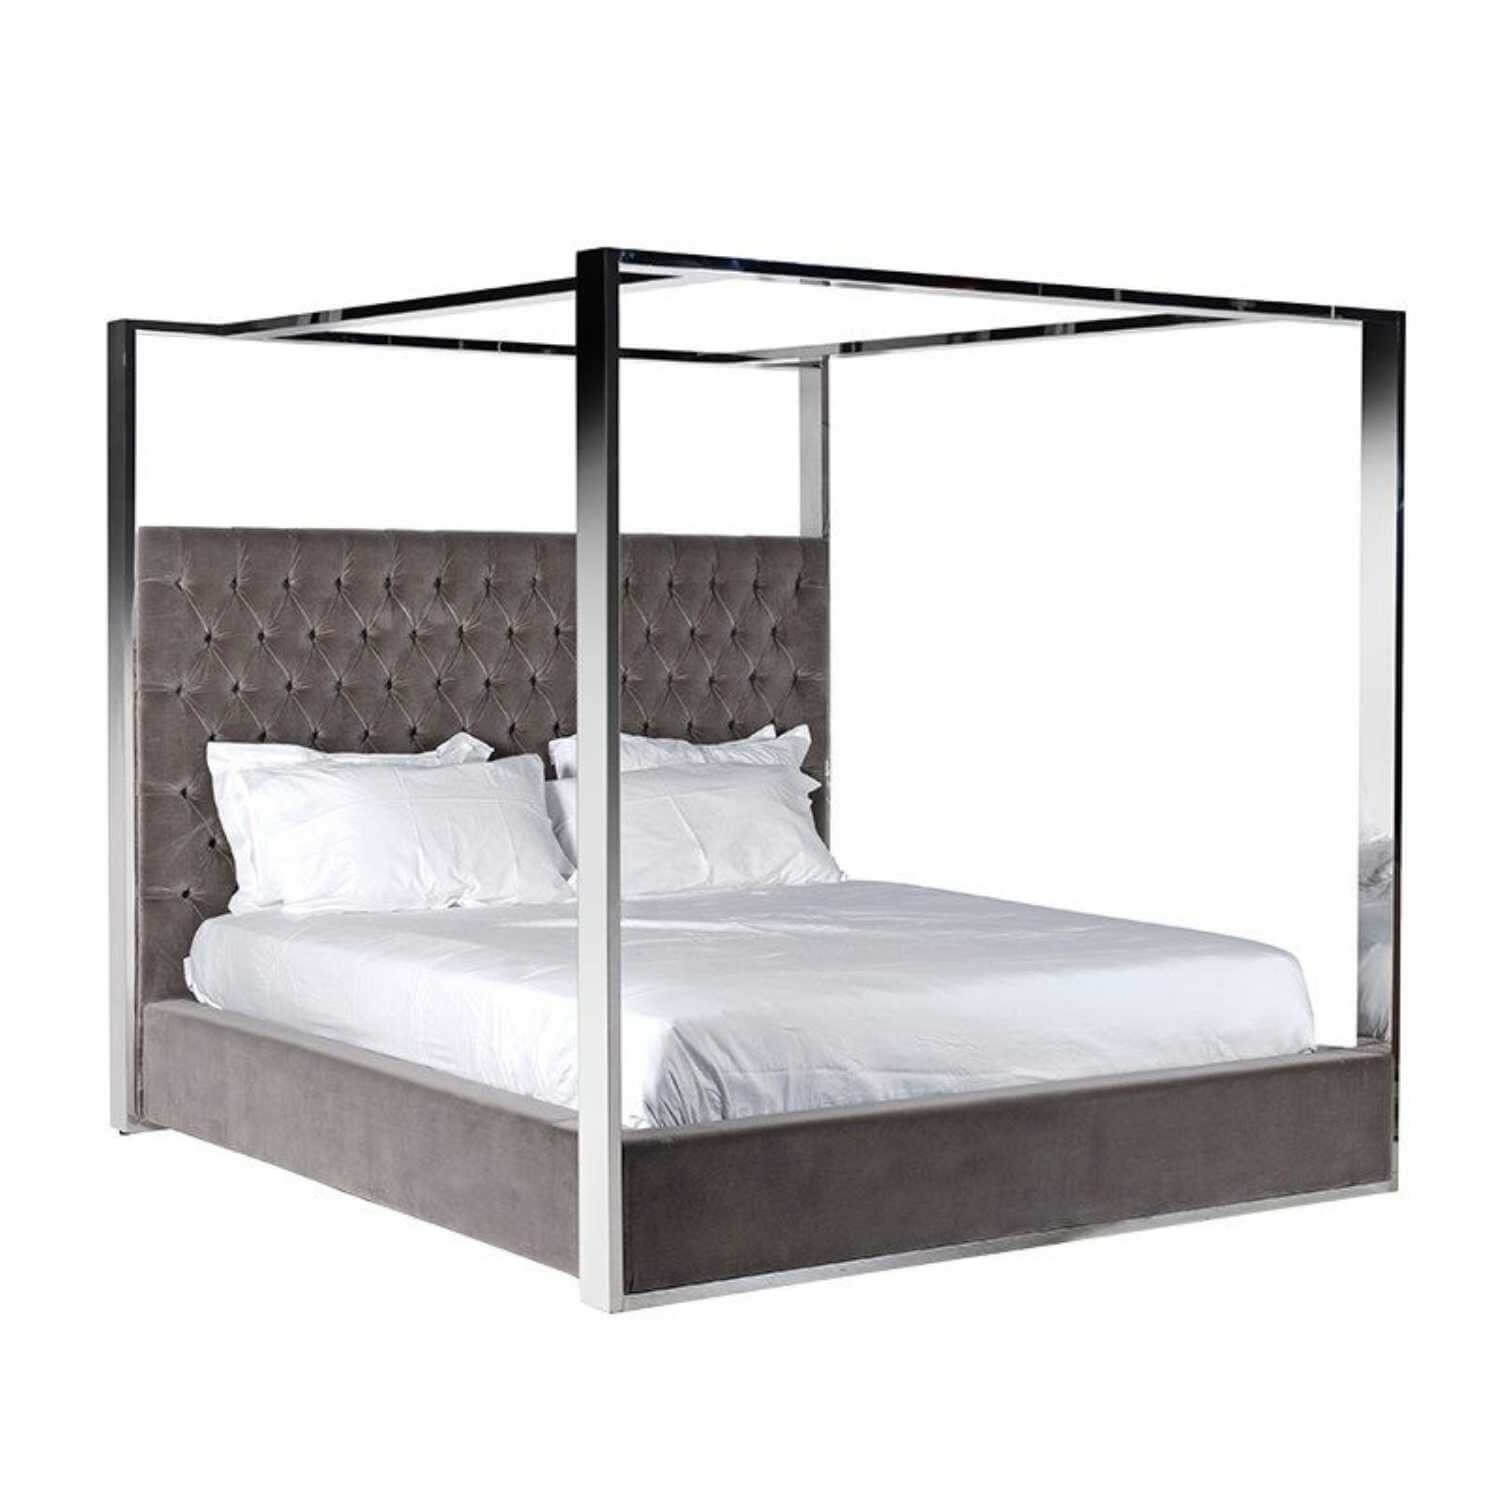 King Size Boston Polished Steel Four, King Size Four Poster Iron Canopy Bed In Black